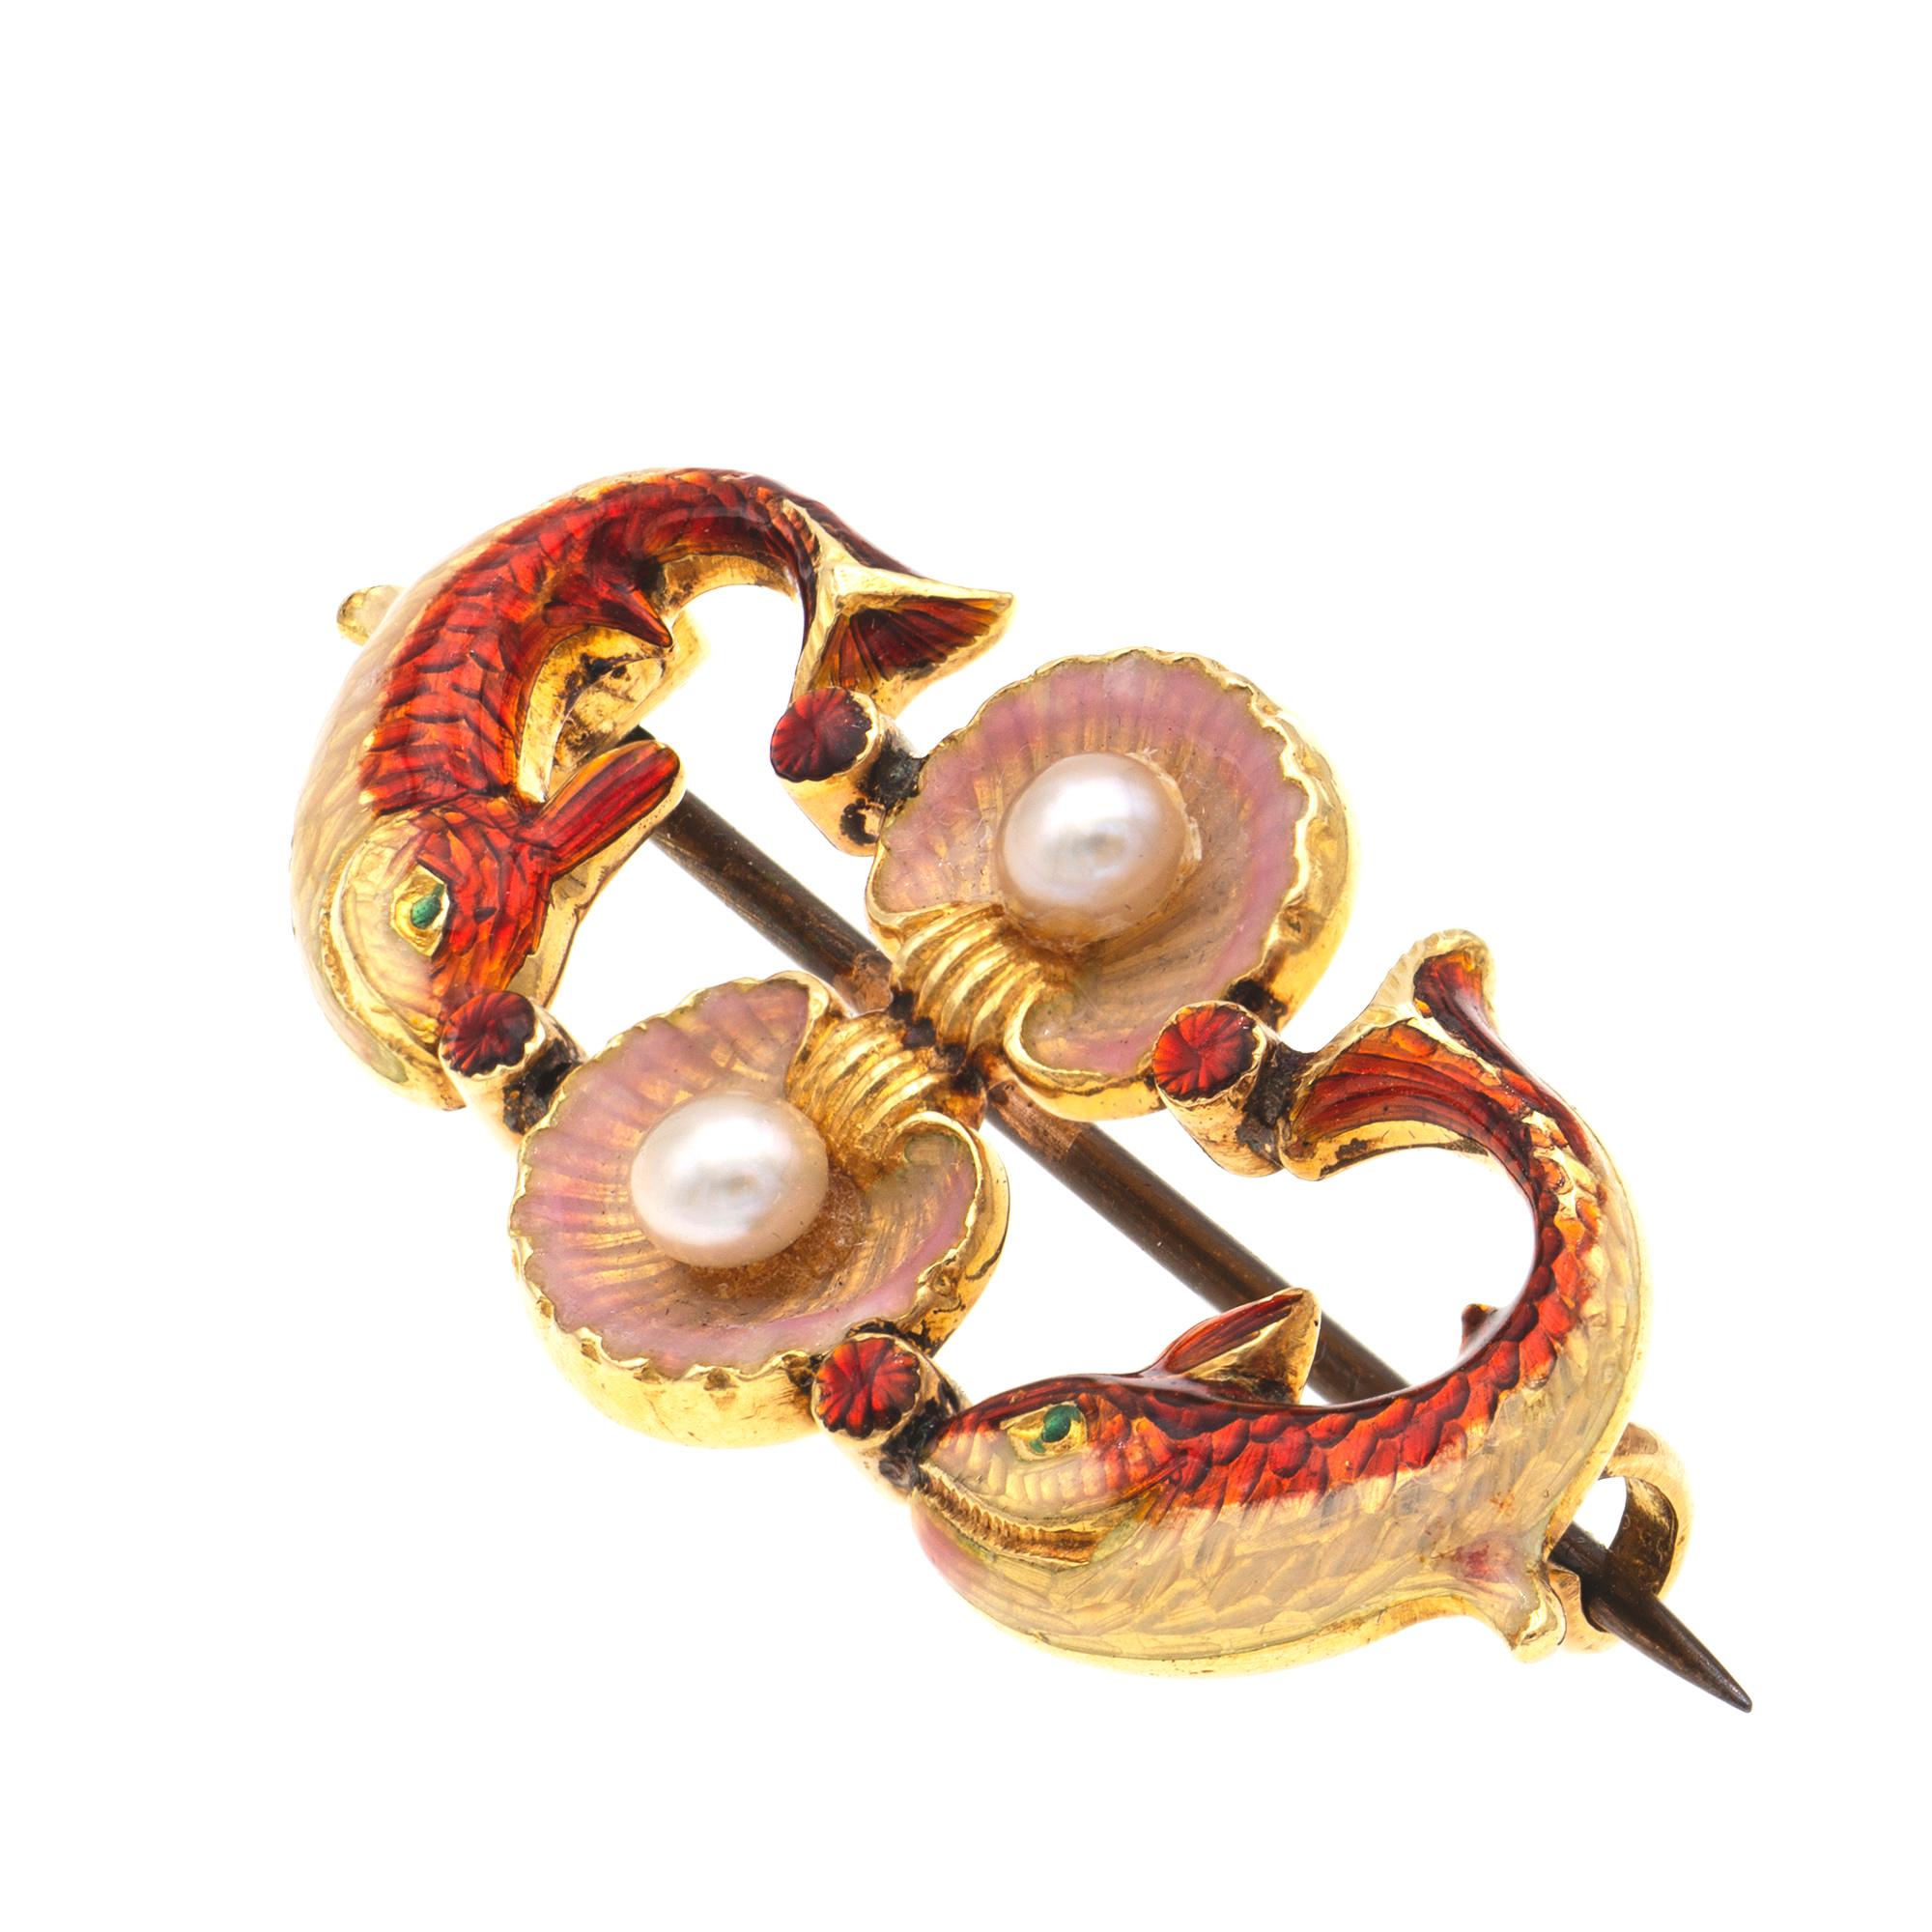 A Phillips red enamelled fish brooch, the two stylised fish enamelled in red and oyster colours, a pair of shells enamelled in pink iridescent colour, each centrally set with a pearl, joining the tails and the heads of the fish, all mounted in 18ct